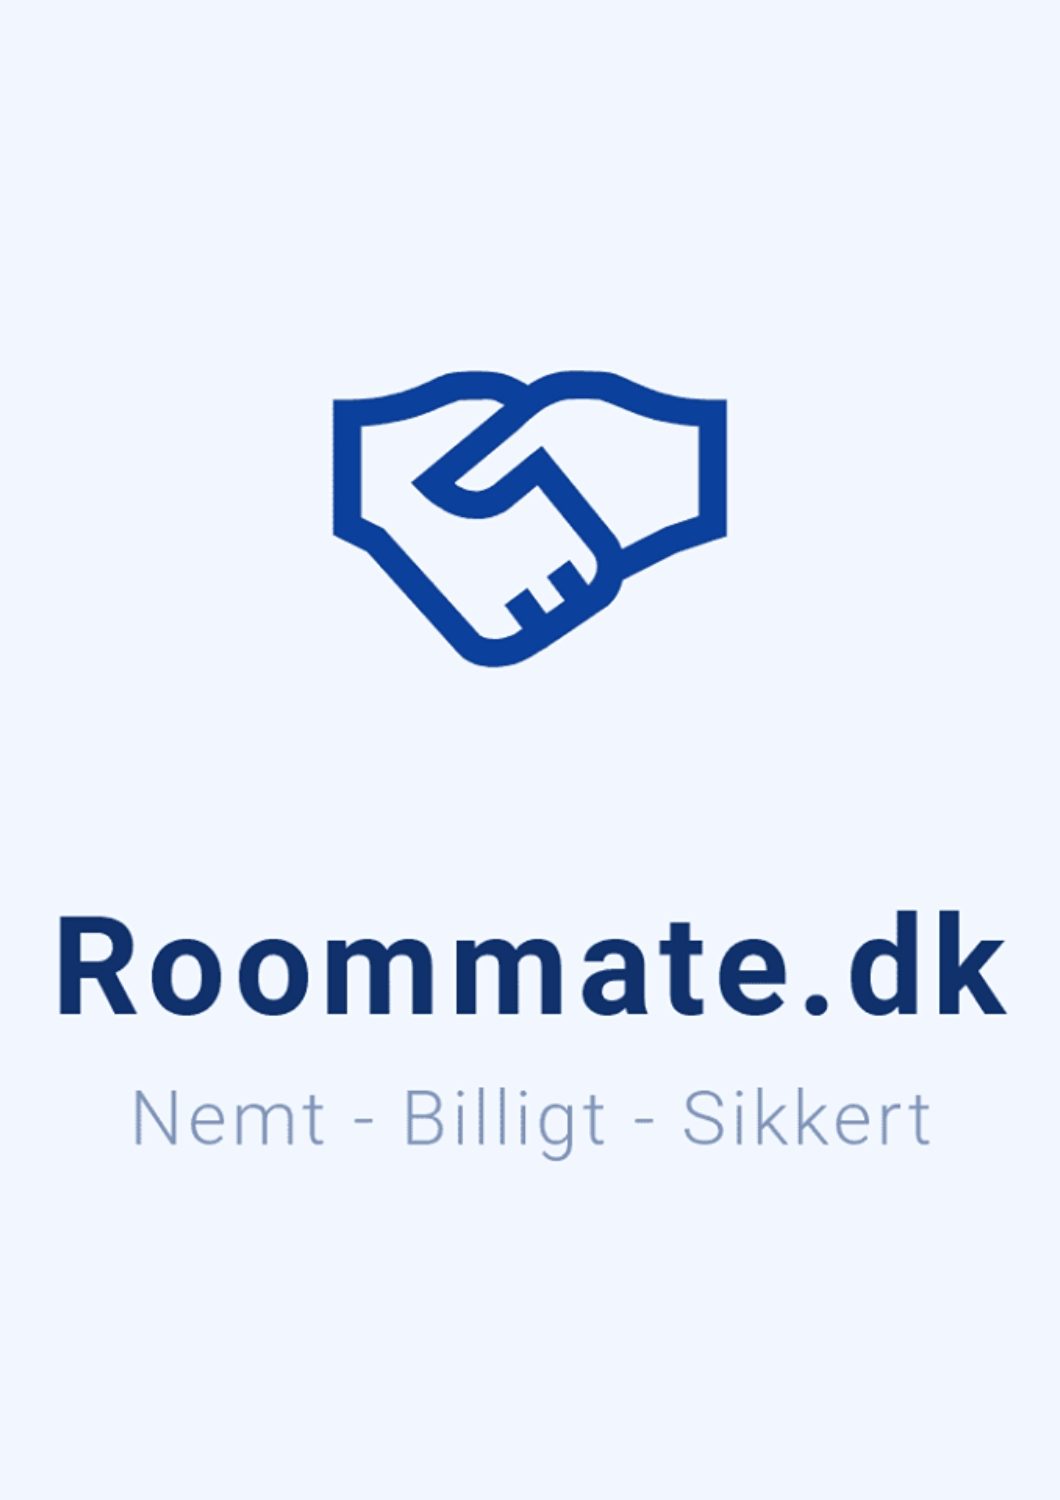 Roommate matchmaking